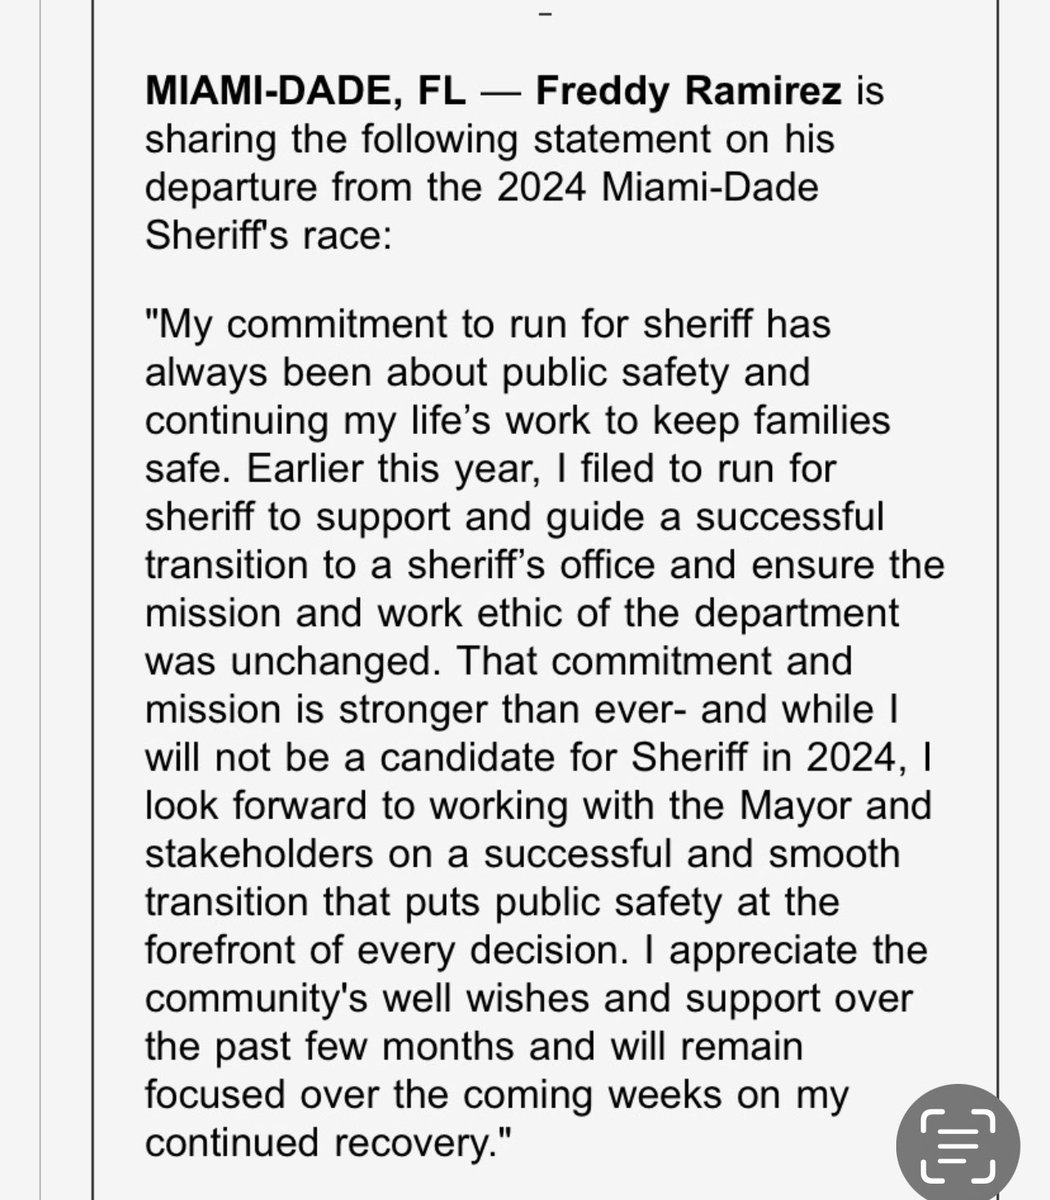 As expected Miami Dade Police Director Freddy Ramirez has dropped out of the sheriff’s race, nearly two months after he shot himself in an apparent suicide attempt. @CBSMiami